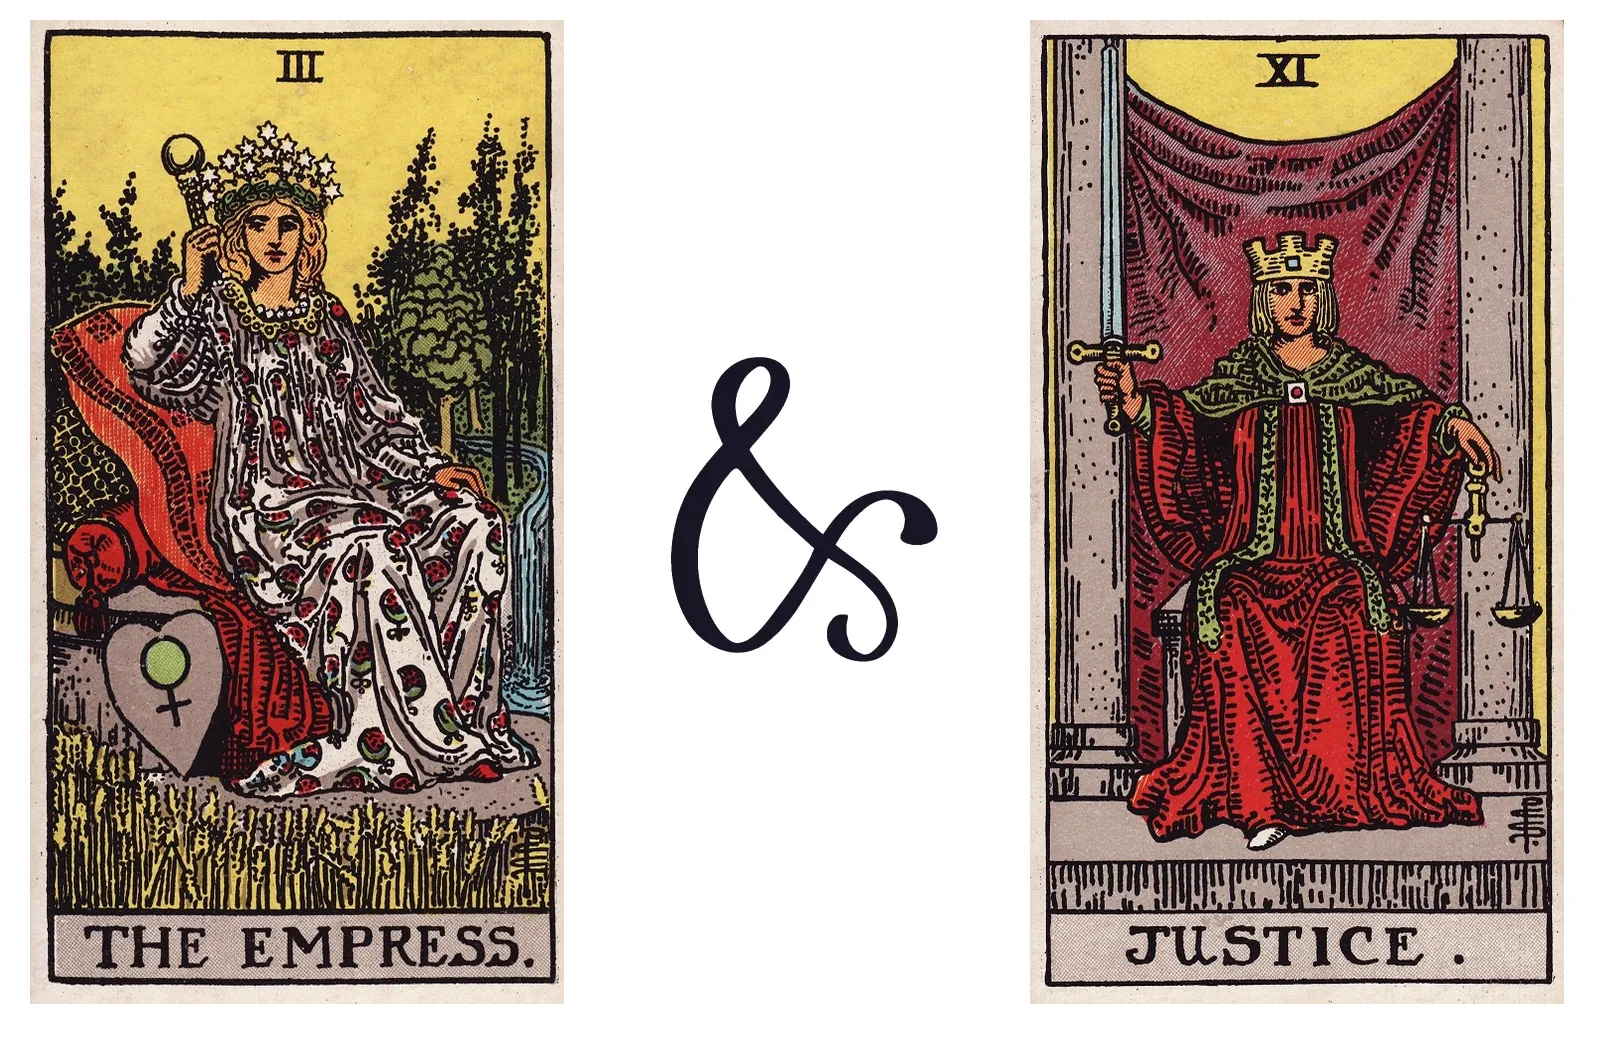 The Empress and Justice